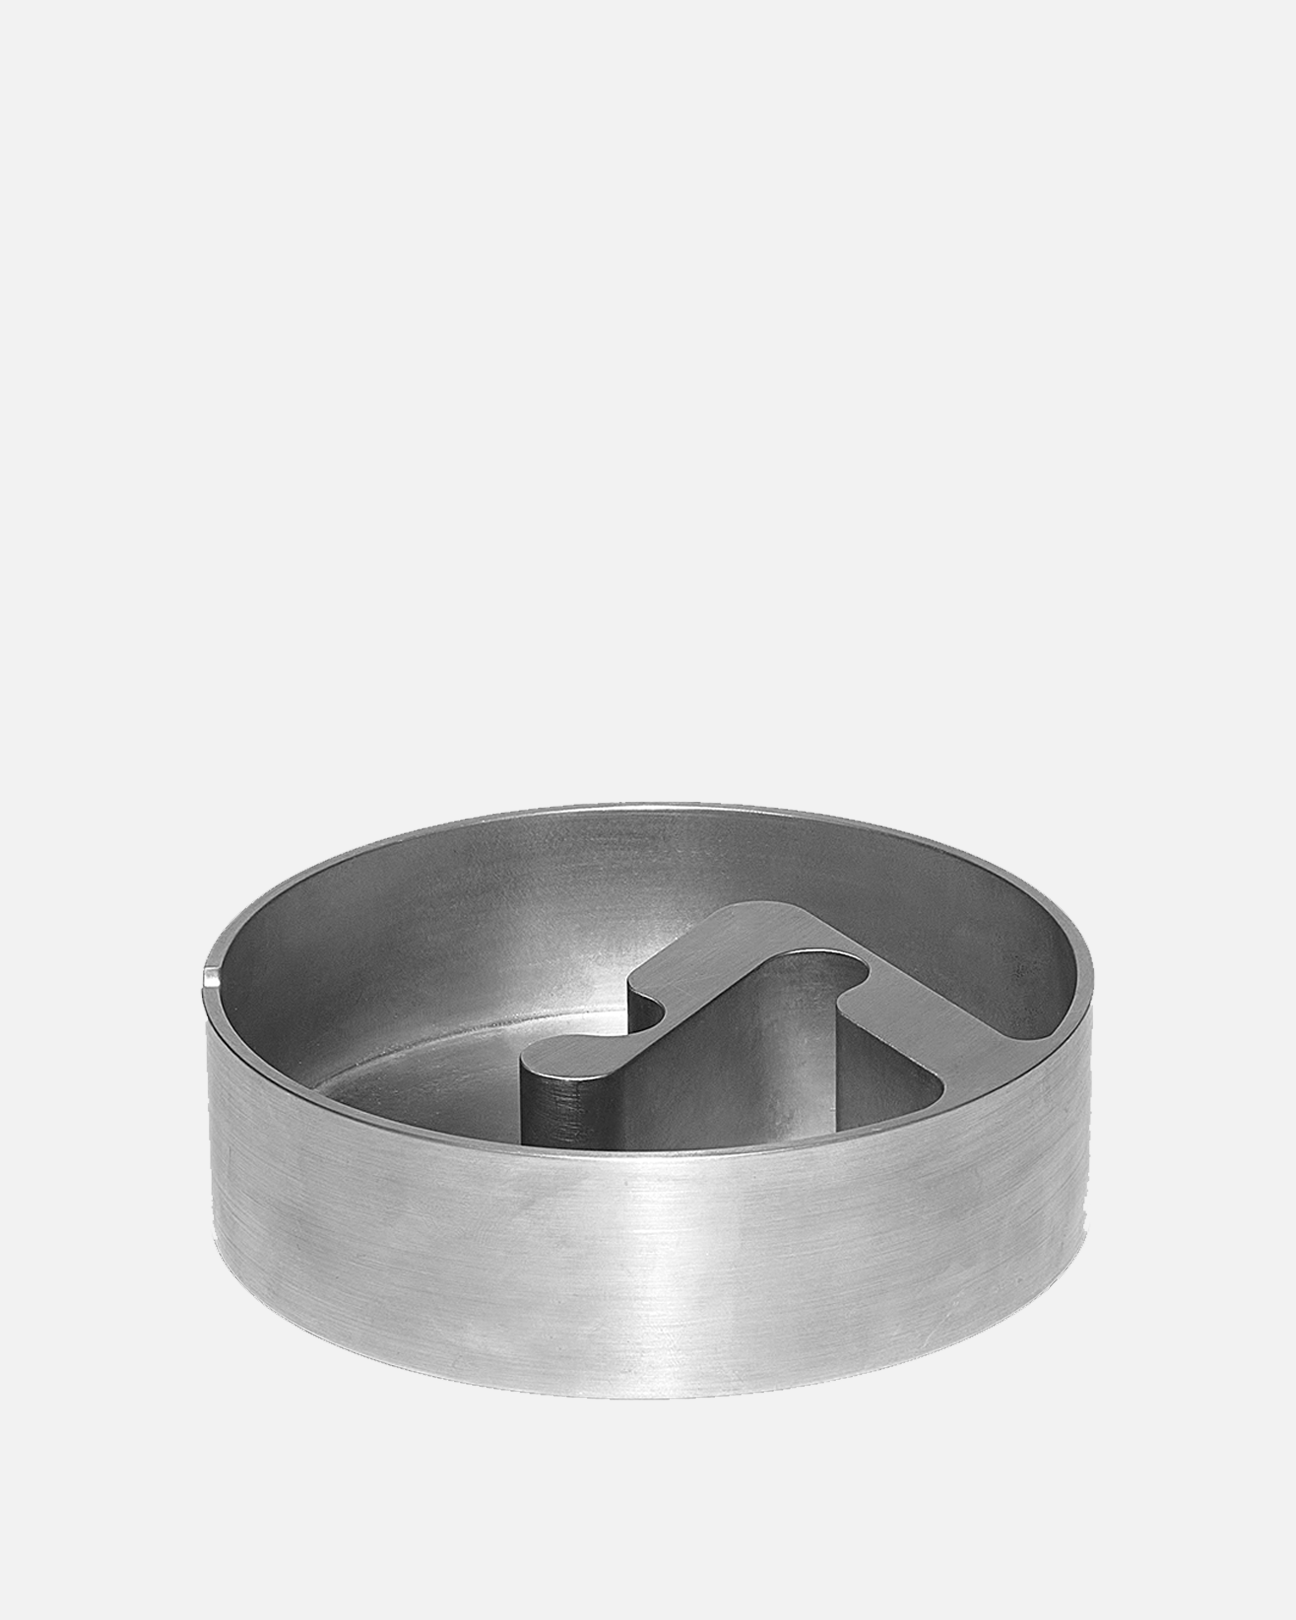 ARCHIVED Home Goods Ash Tray in Silver